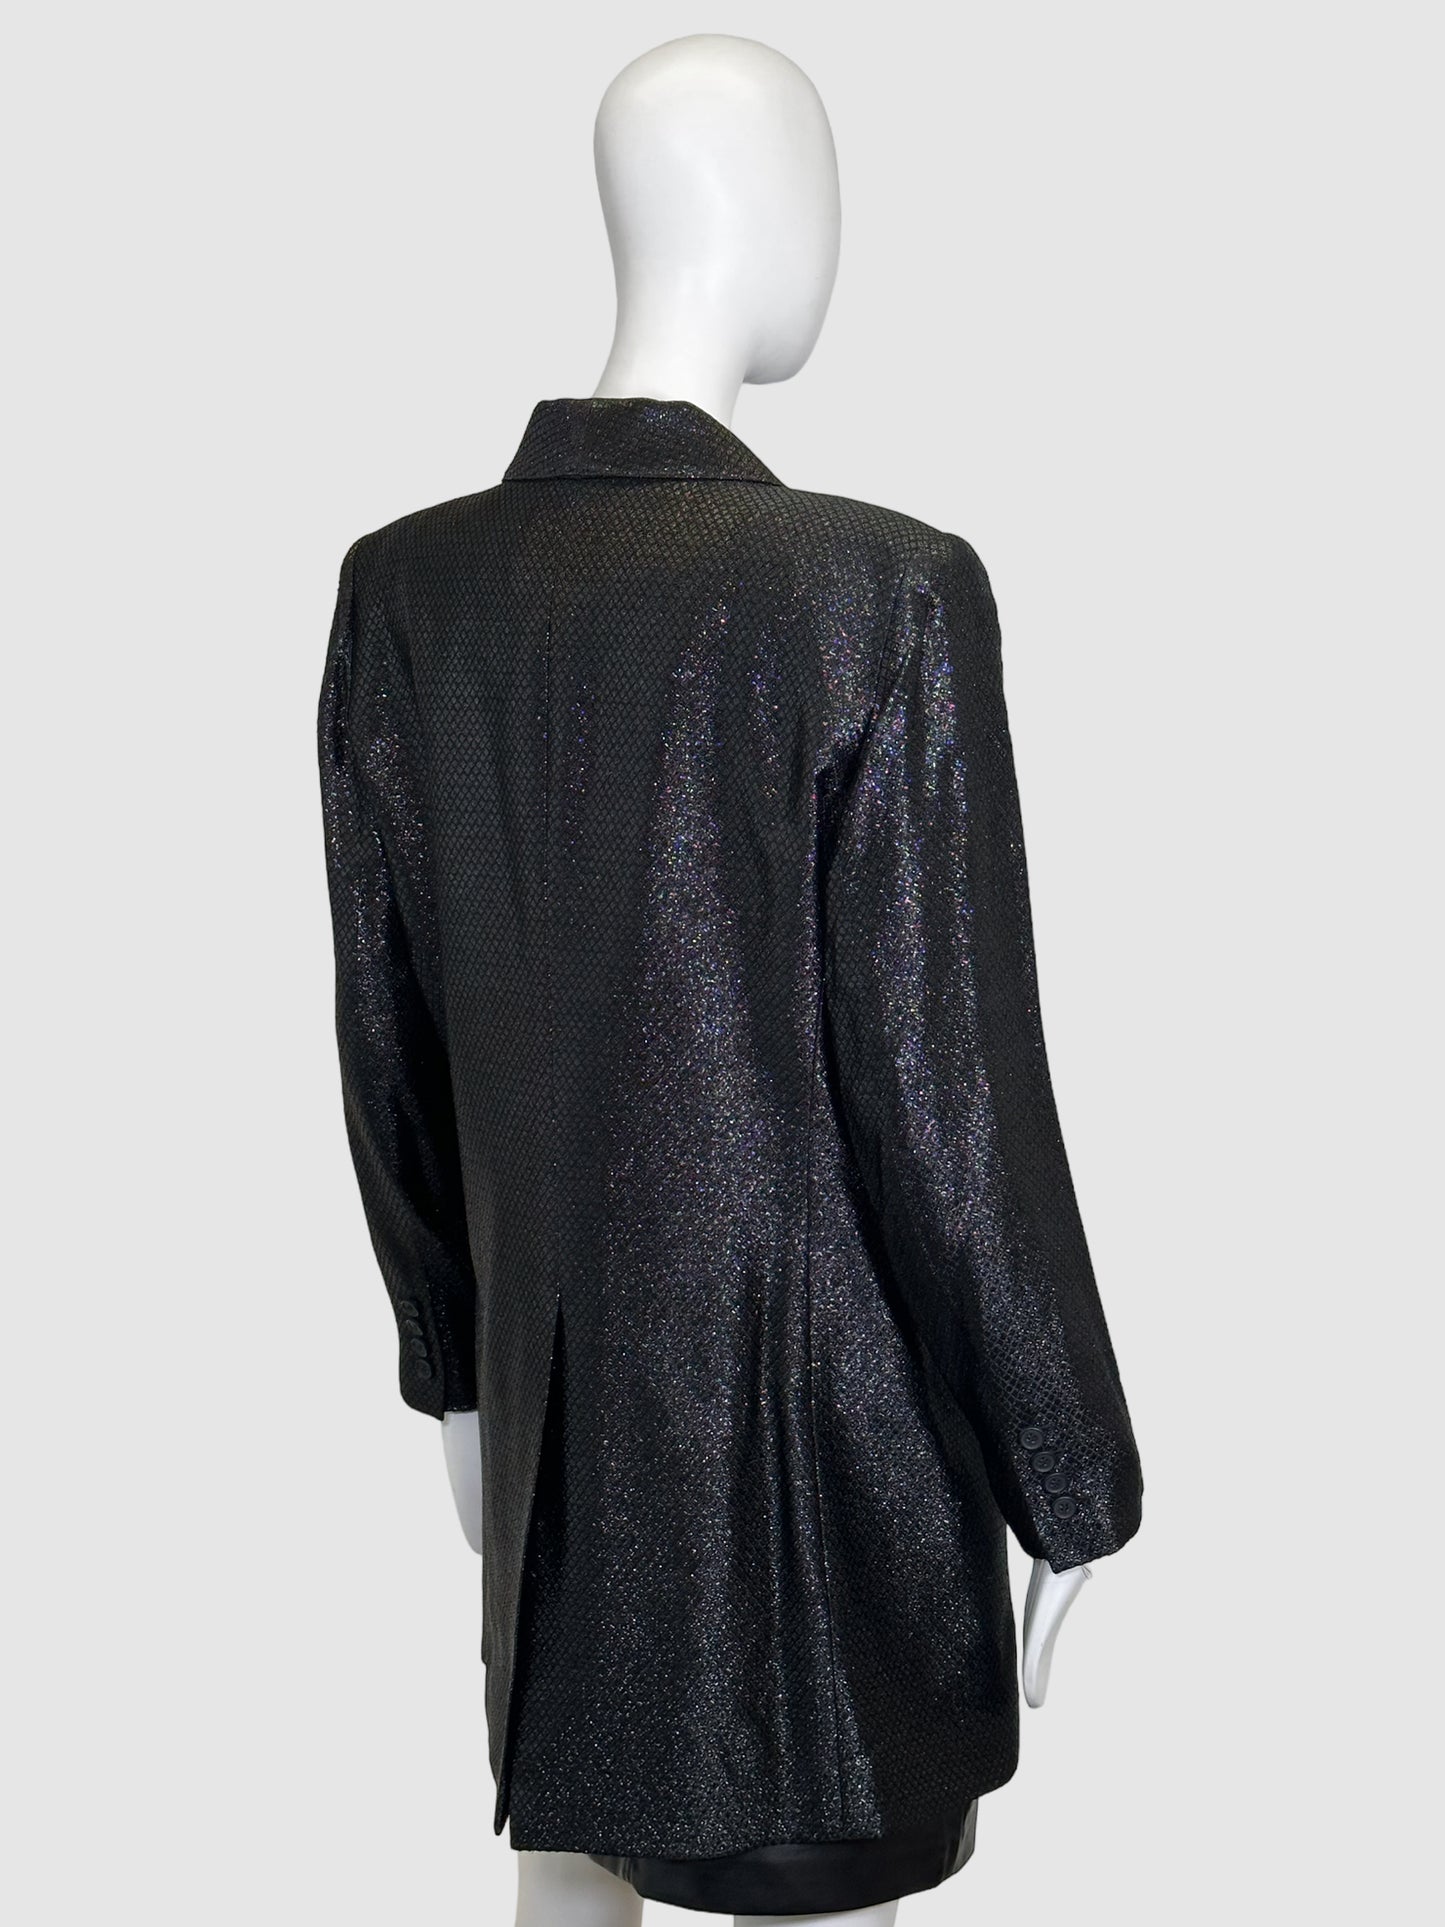 Shimmery Double-Breasted Blazer - Size 10